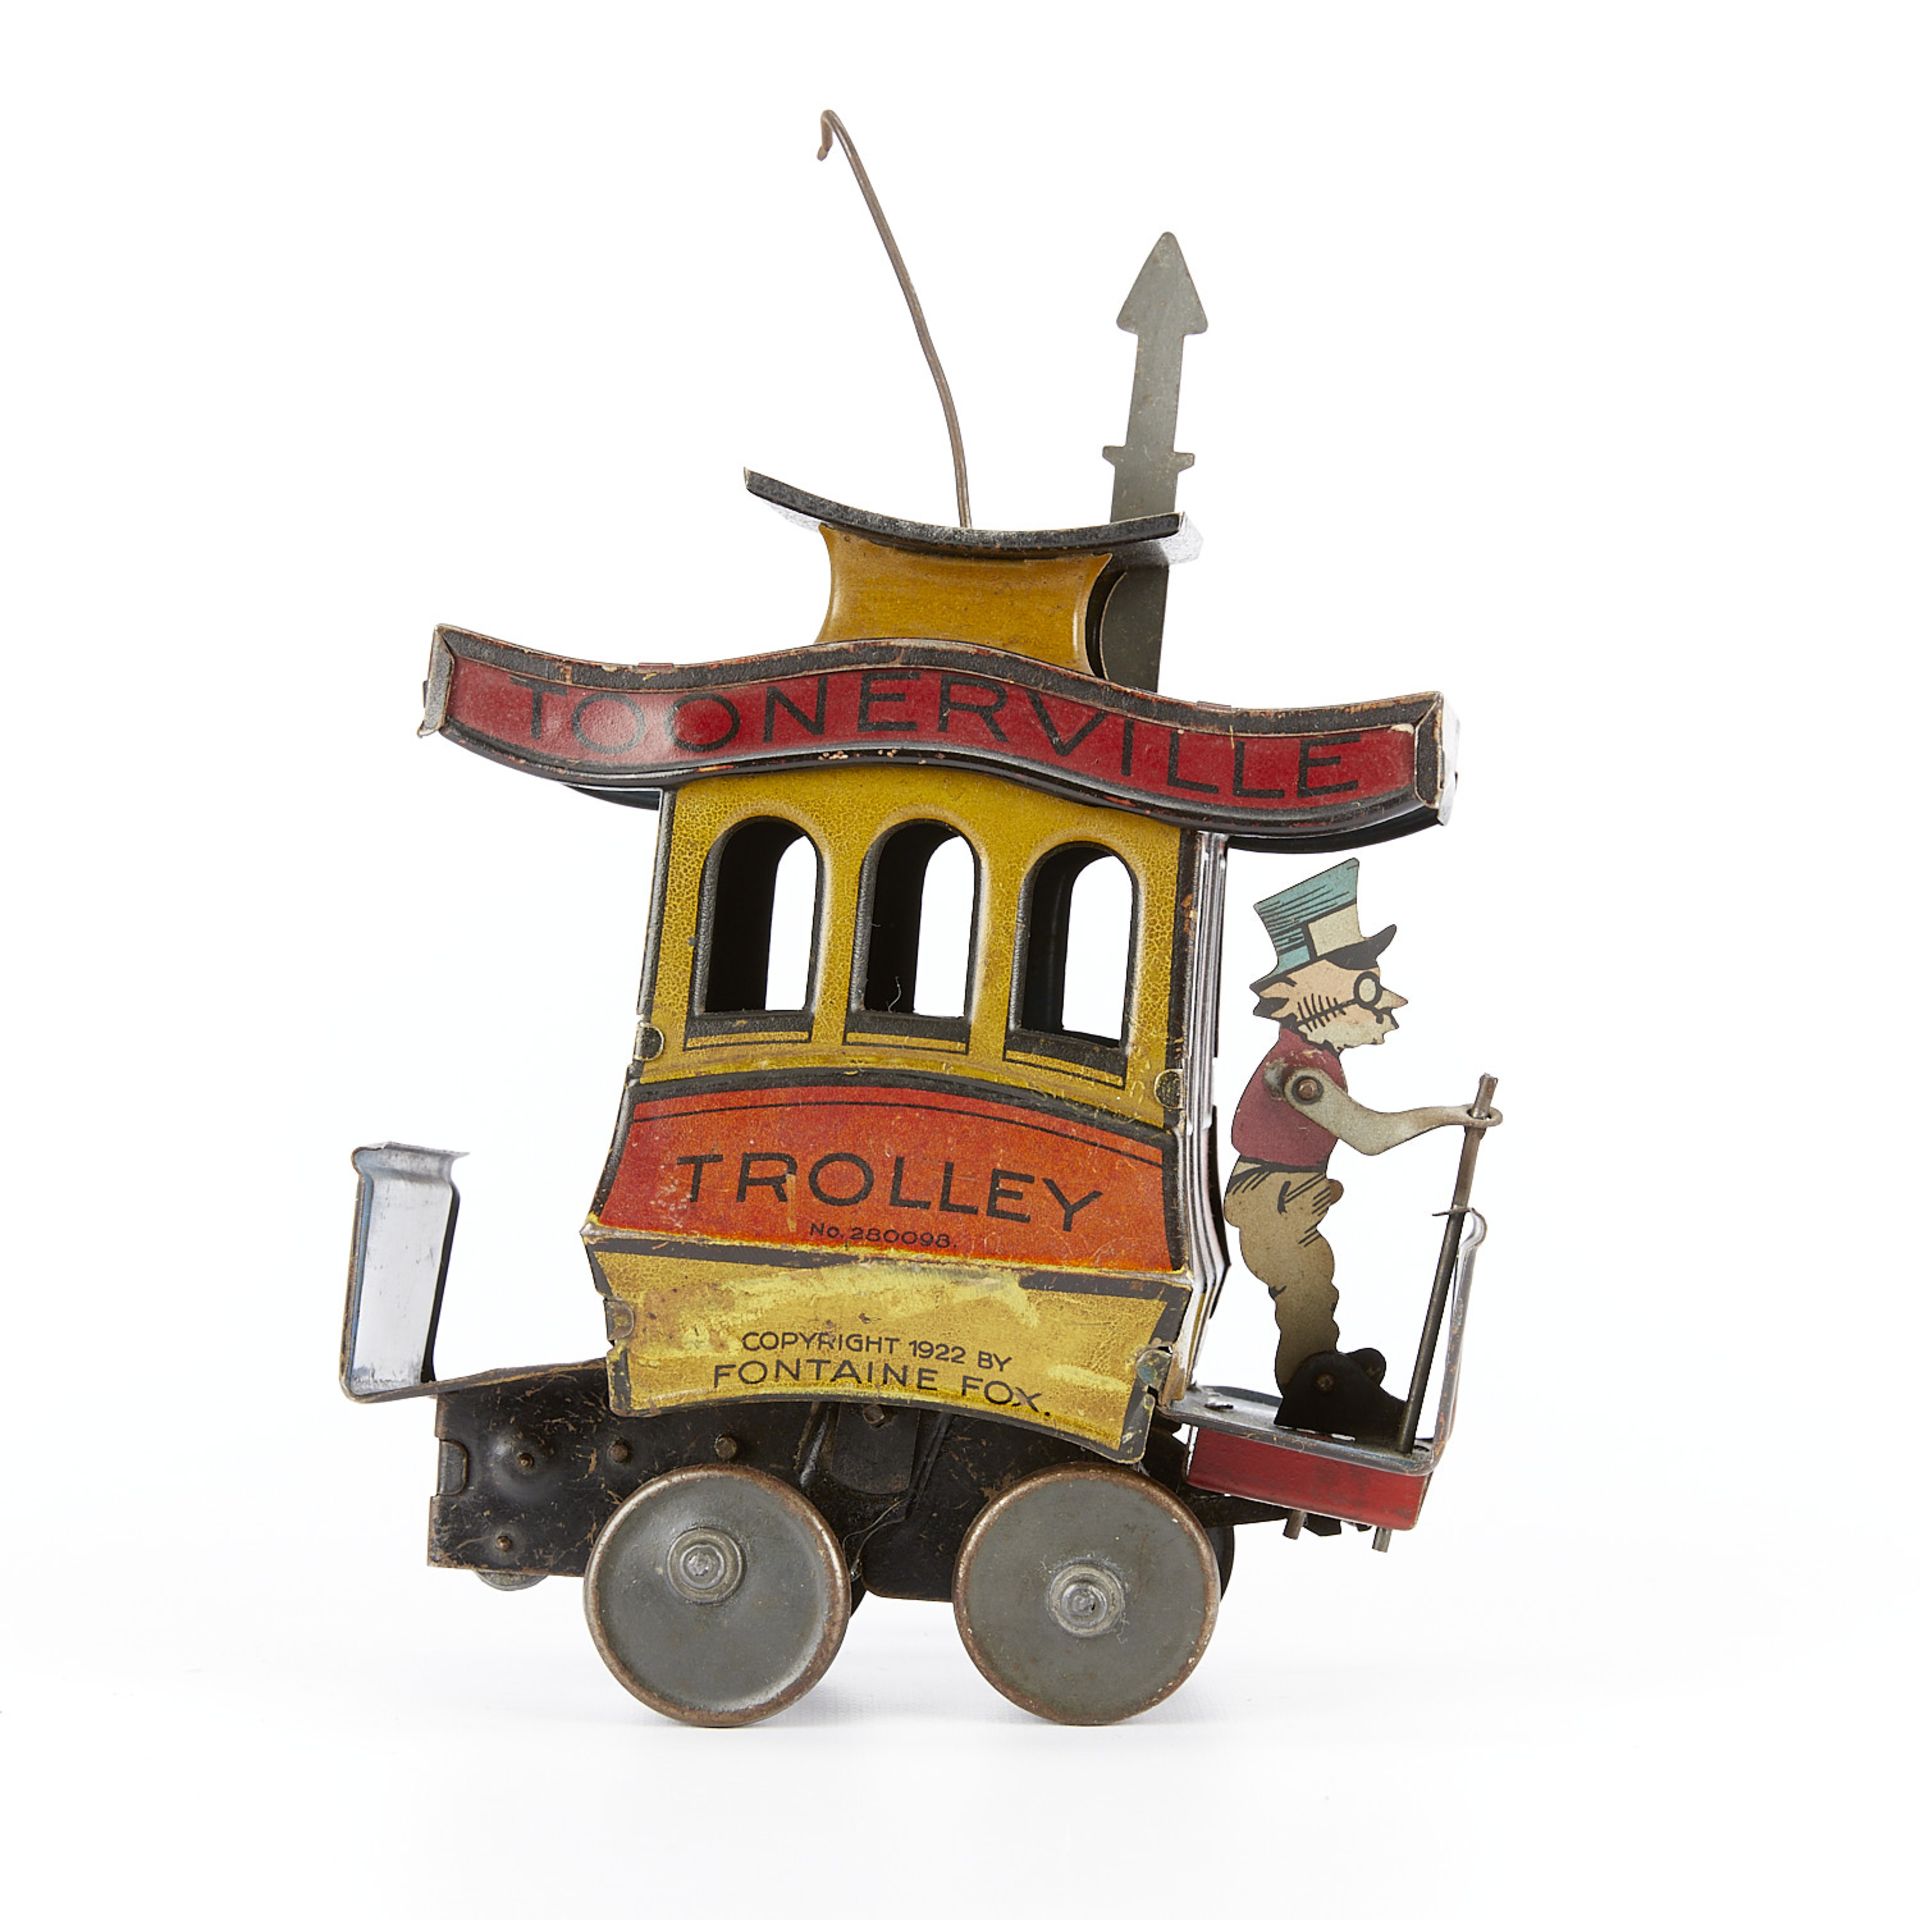 Fontaine Fox German Toonerville Trolley Tin Toy - Image 5 of 10